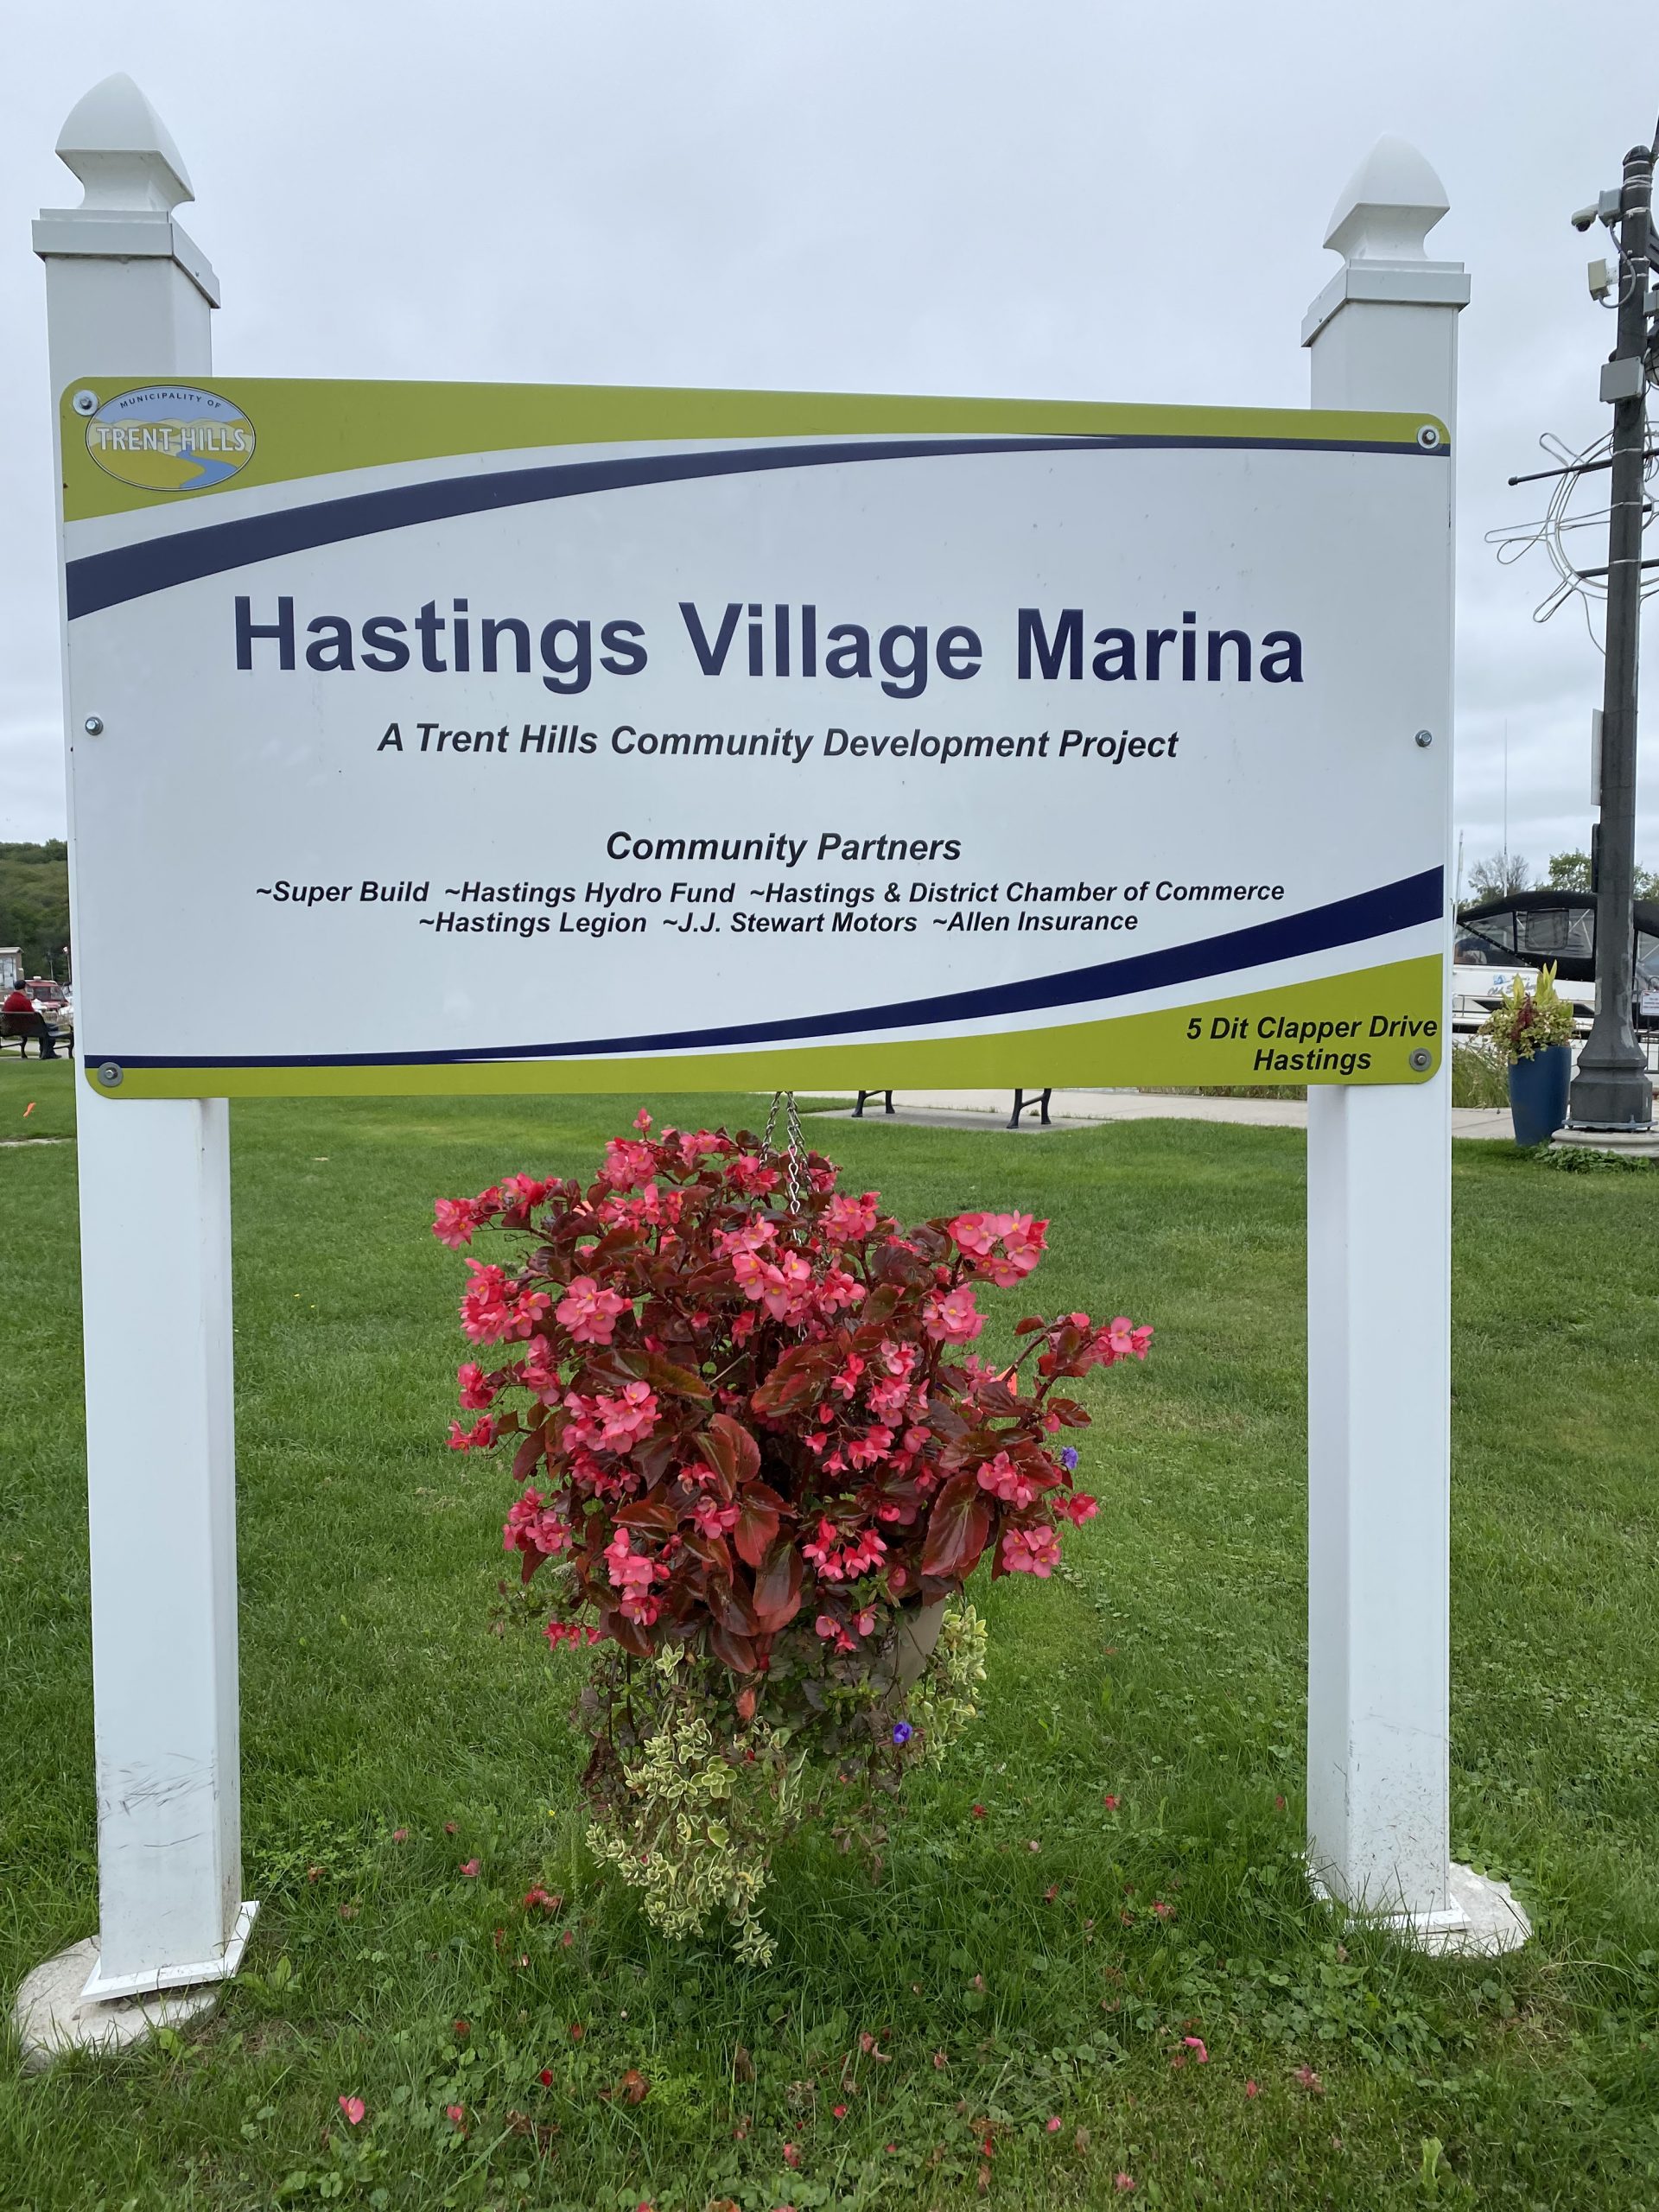 Hastings Village Marina sign in the village of Hastings with a pot of red flowers below the sign